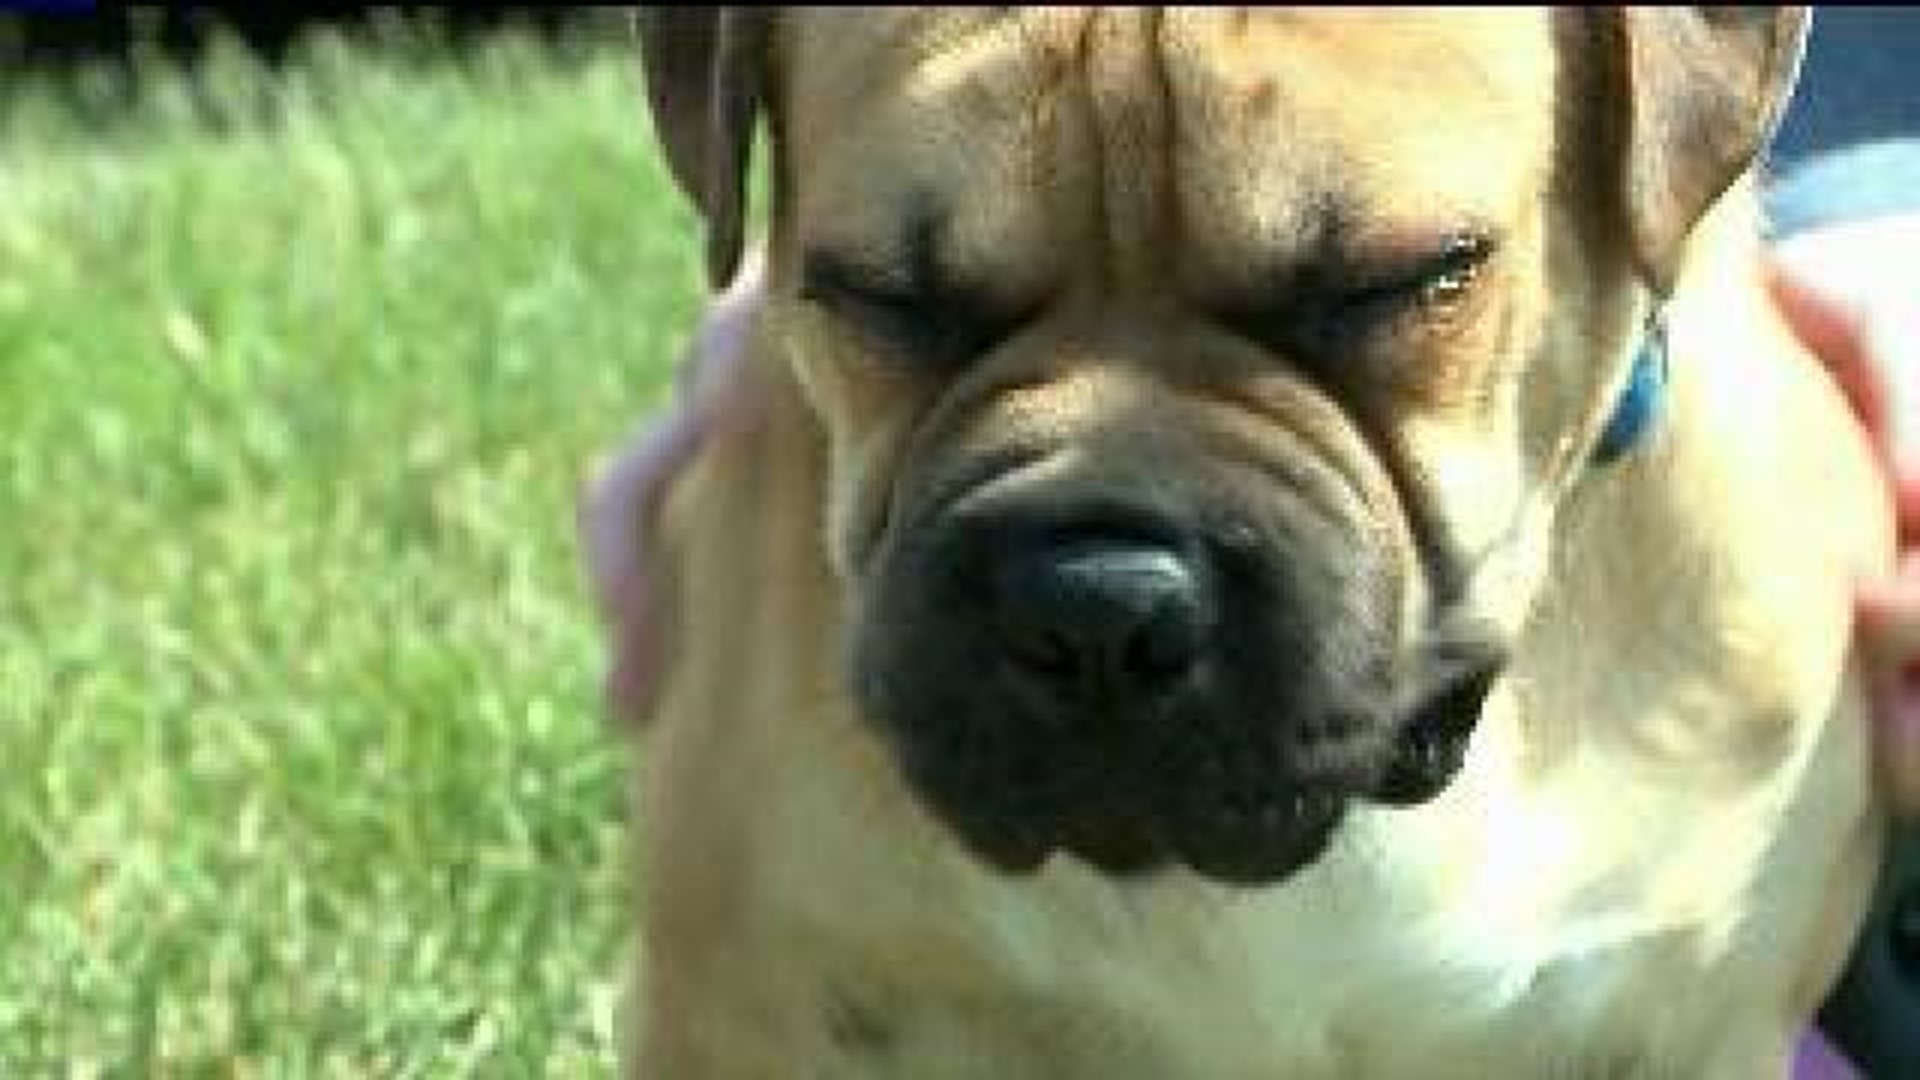 Wham Cam: Why Do Dogs Have Wet Noses?